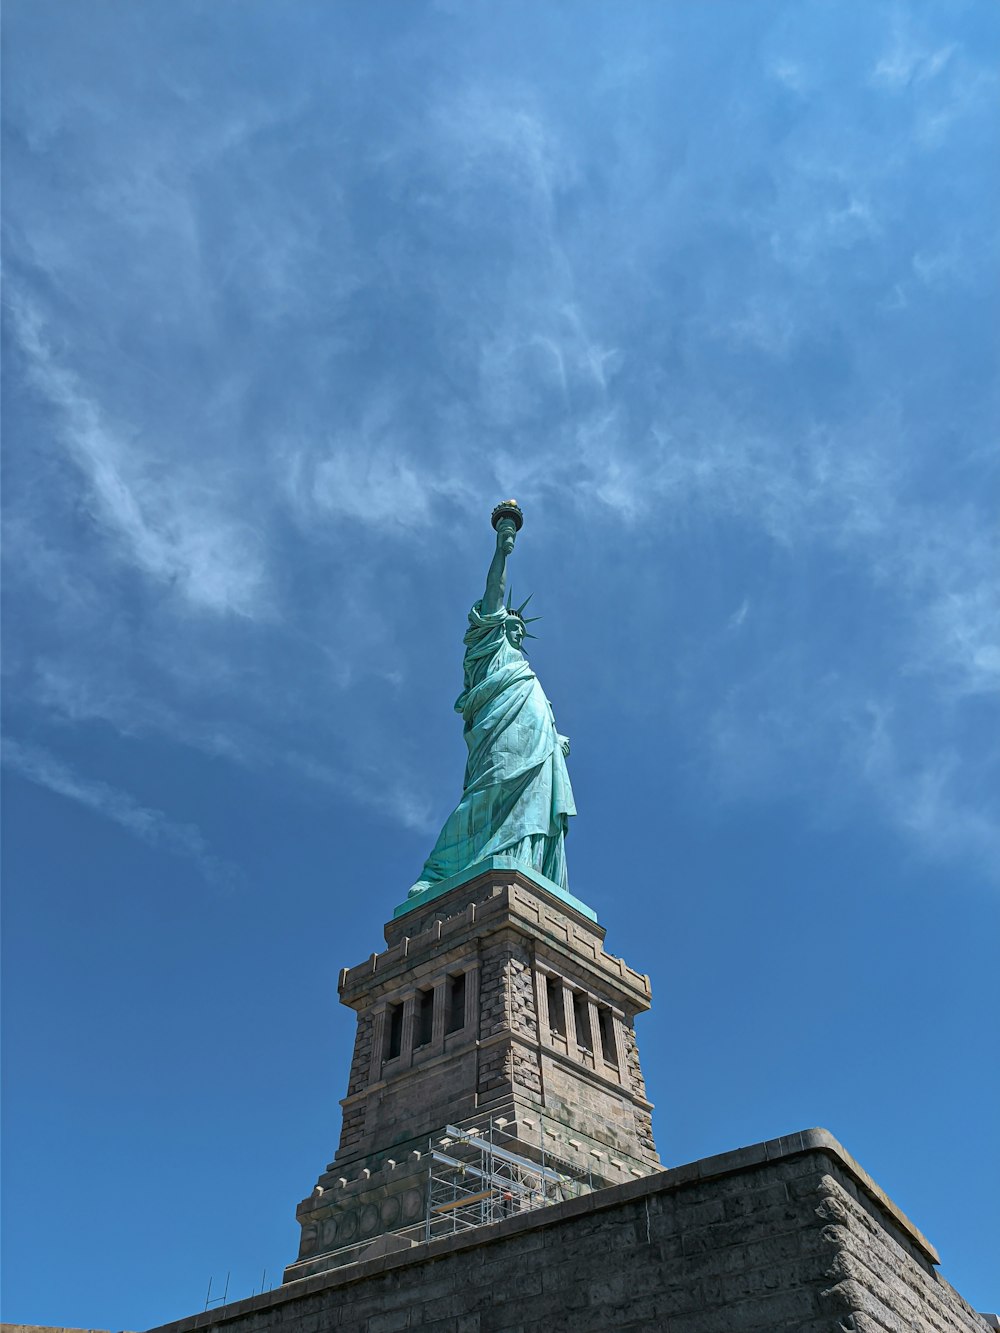 a view of the statue of liberty from the top of a building